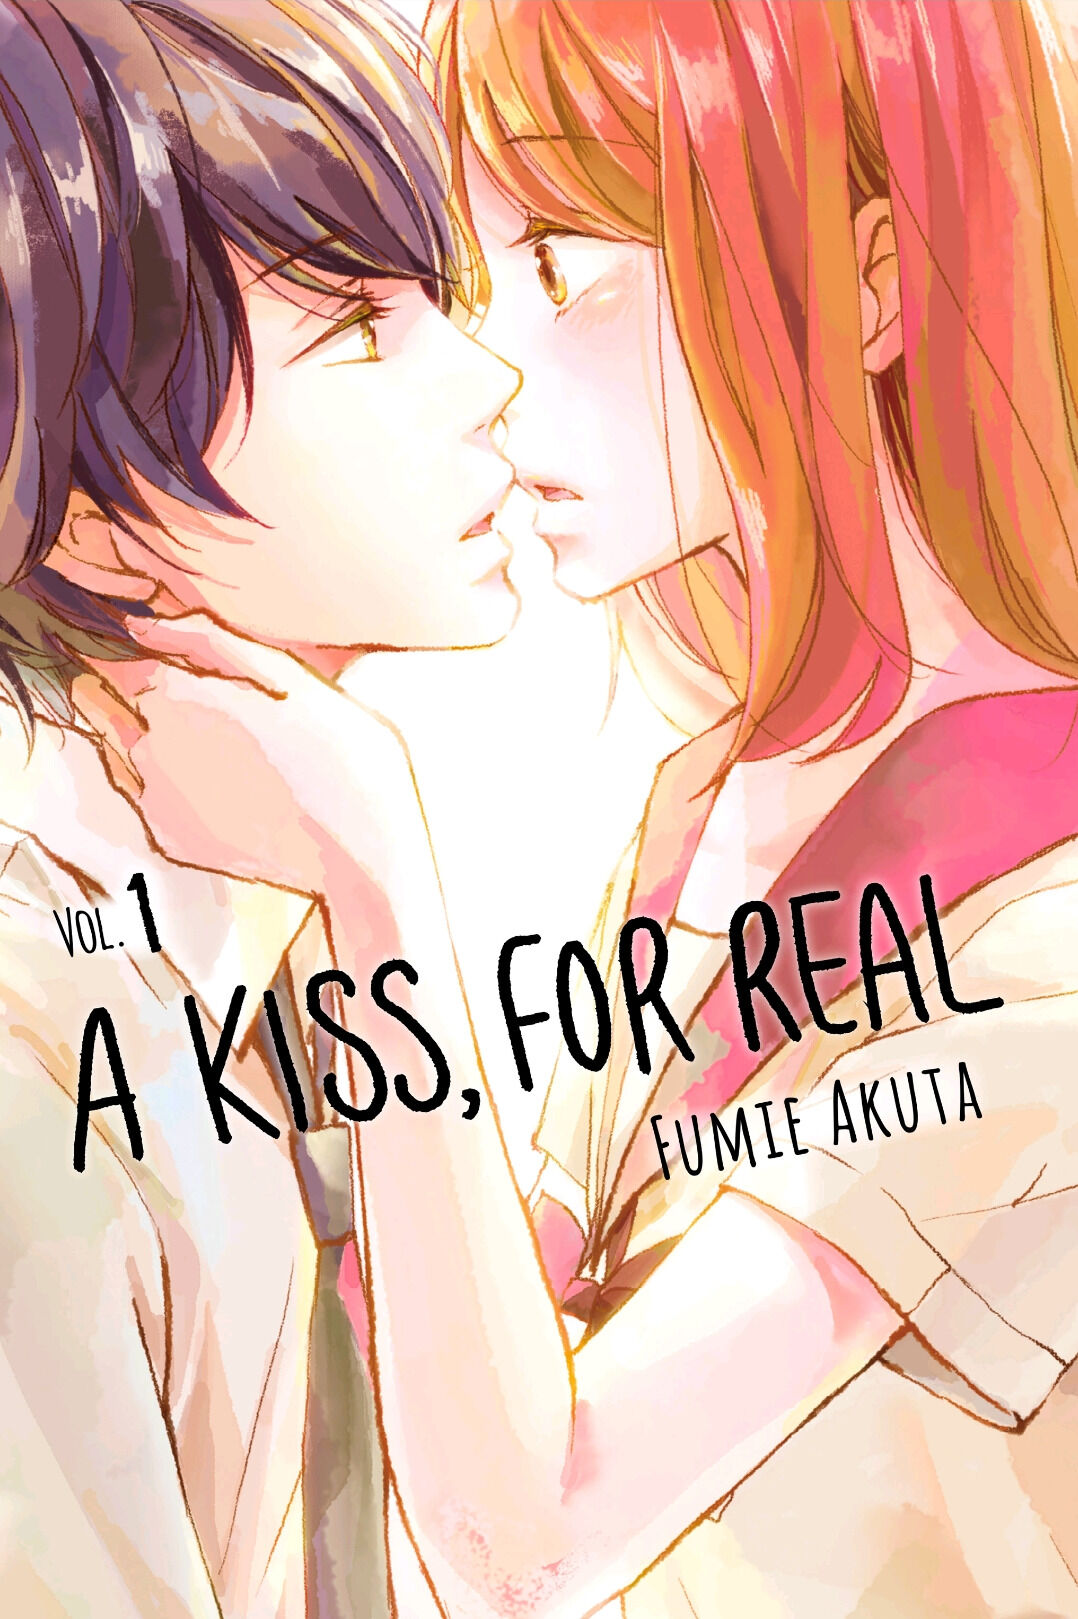 A Kiss, For Real Volume 1 Chapter 1